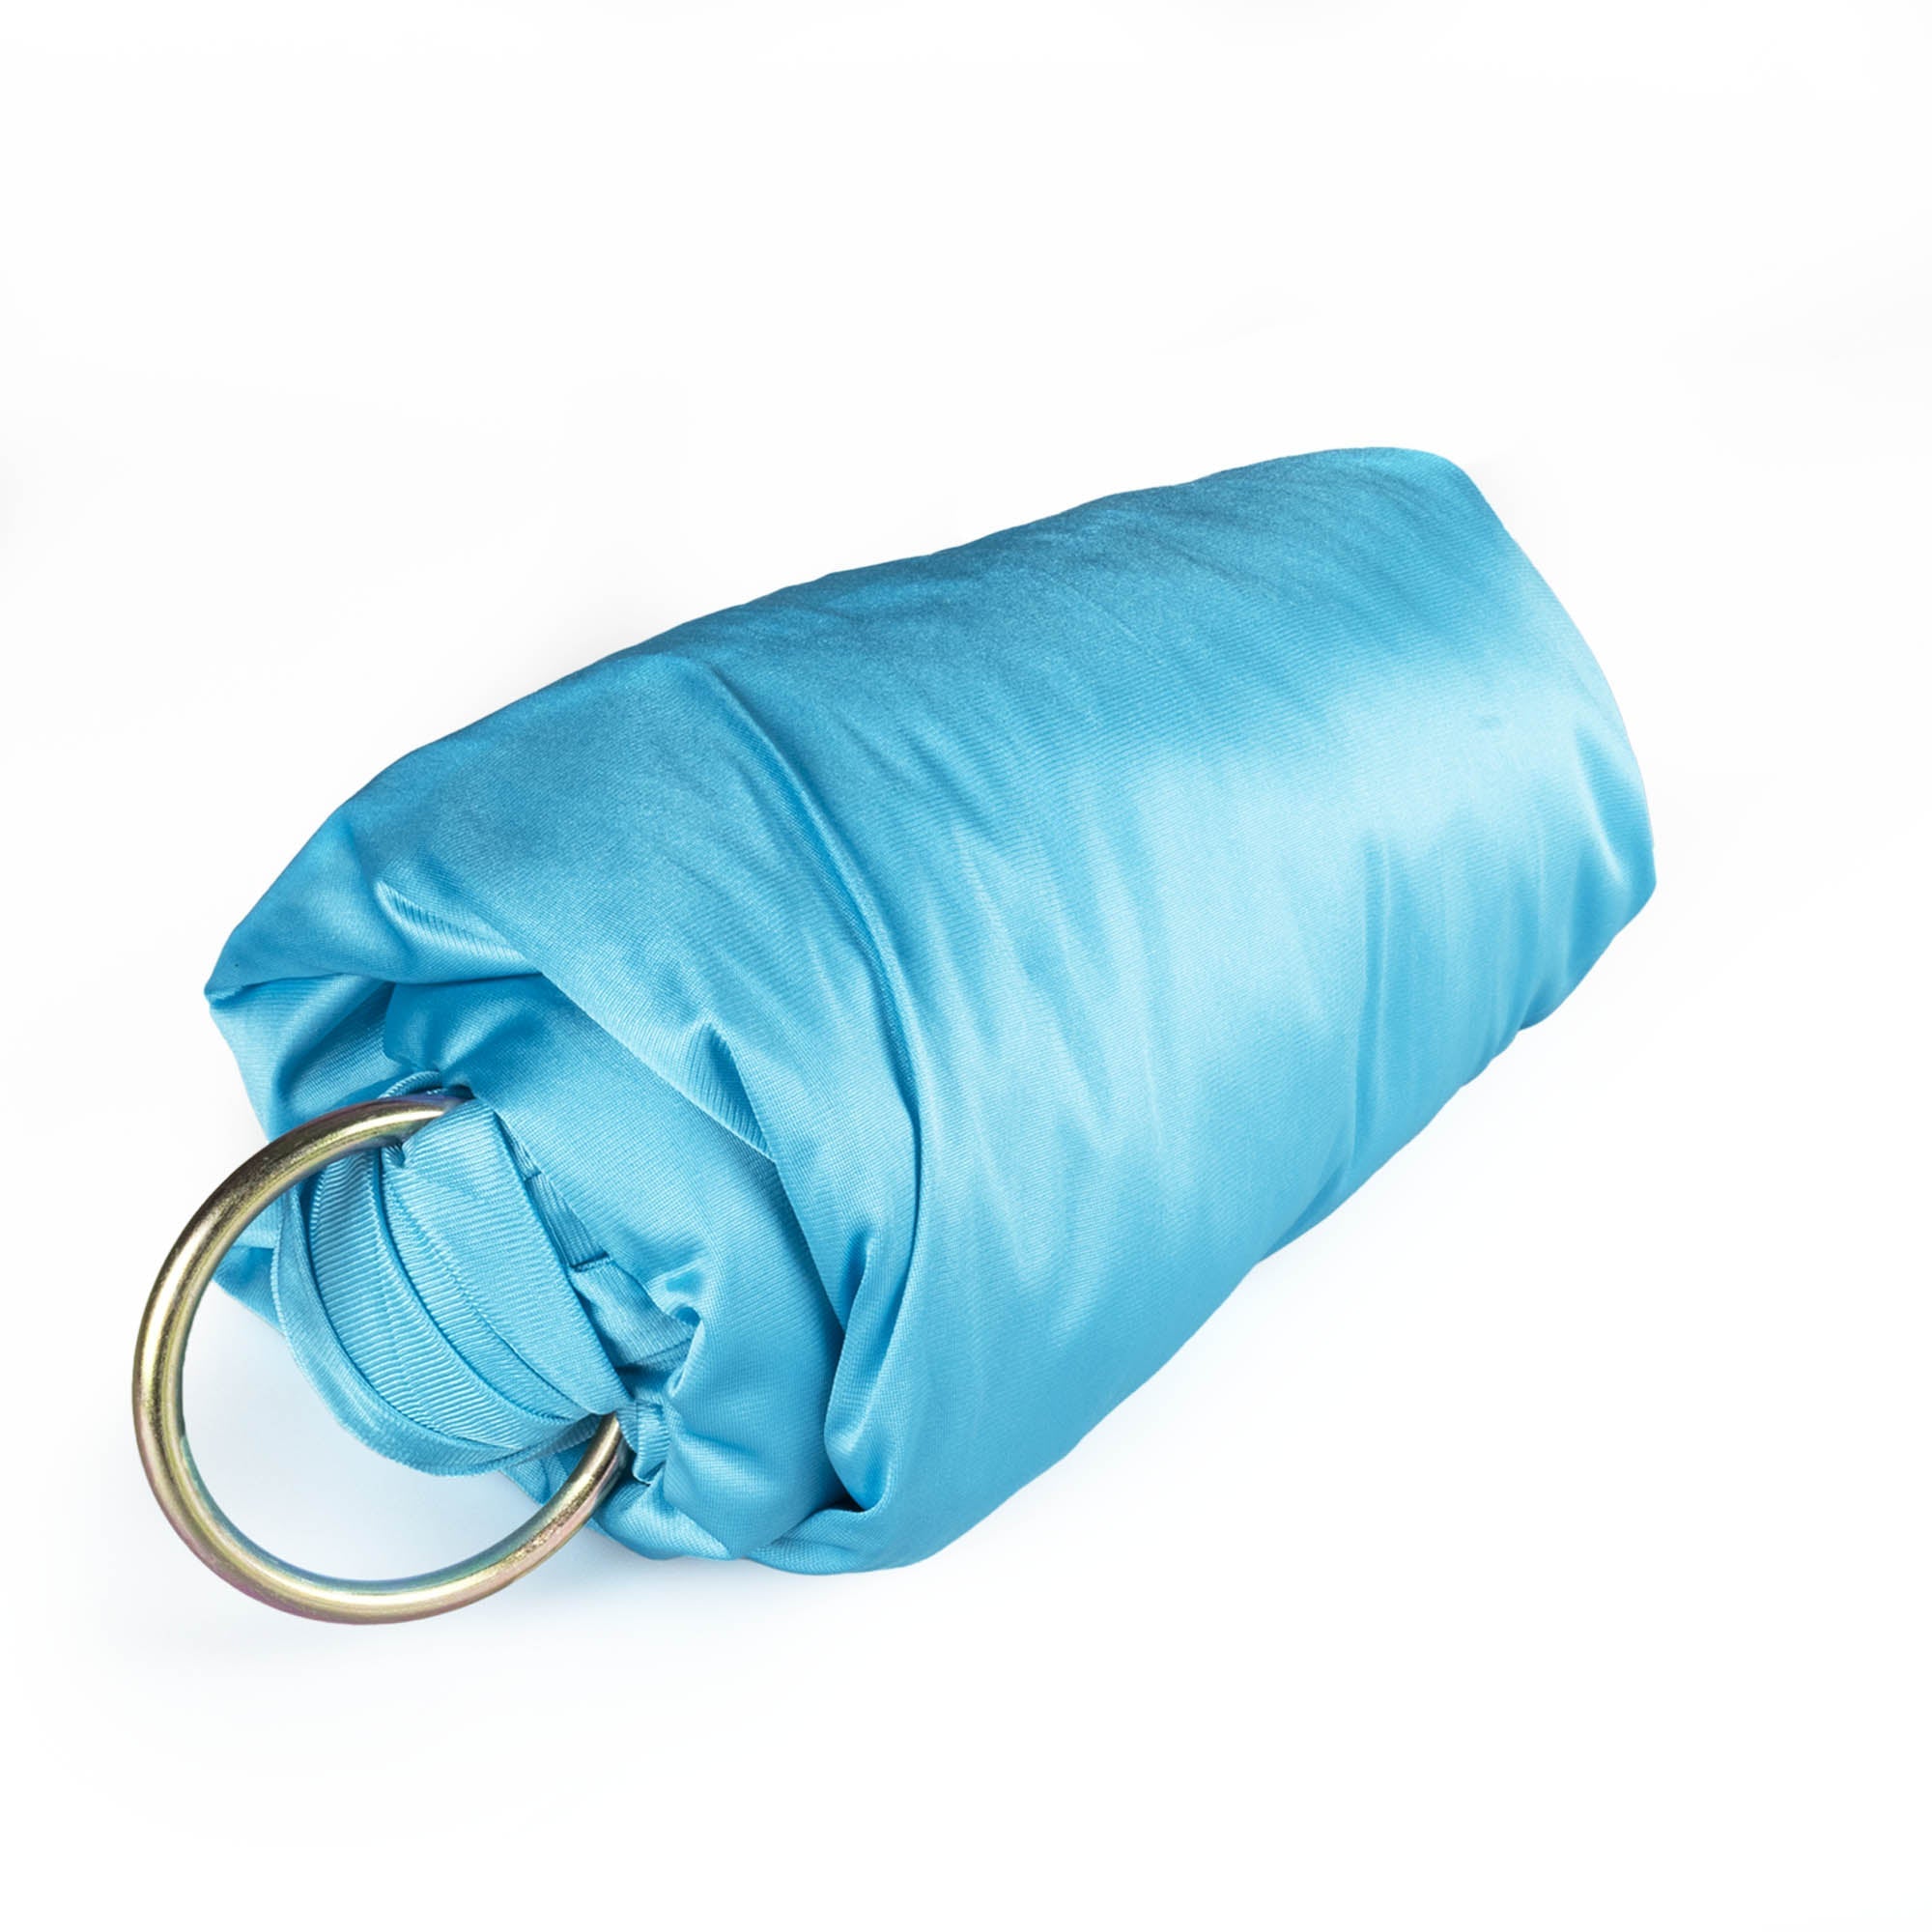 Turquoise yoga hammock rolled up with rings attached